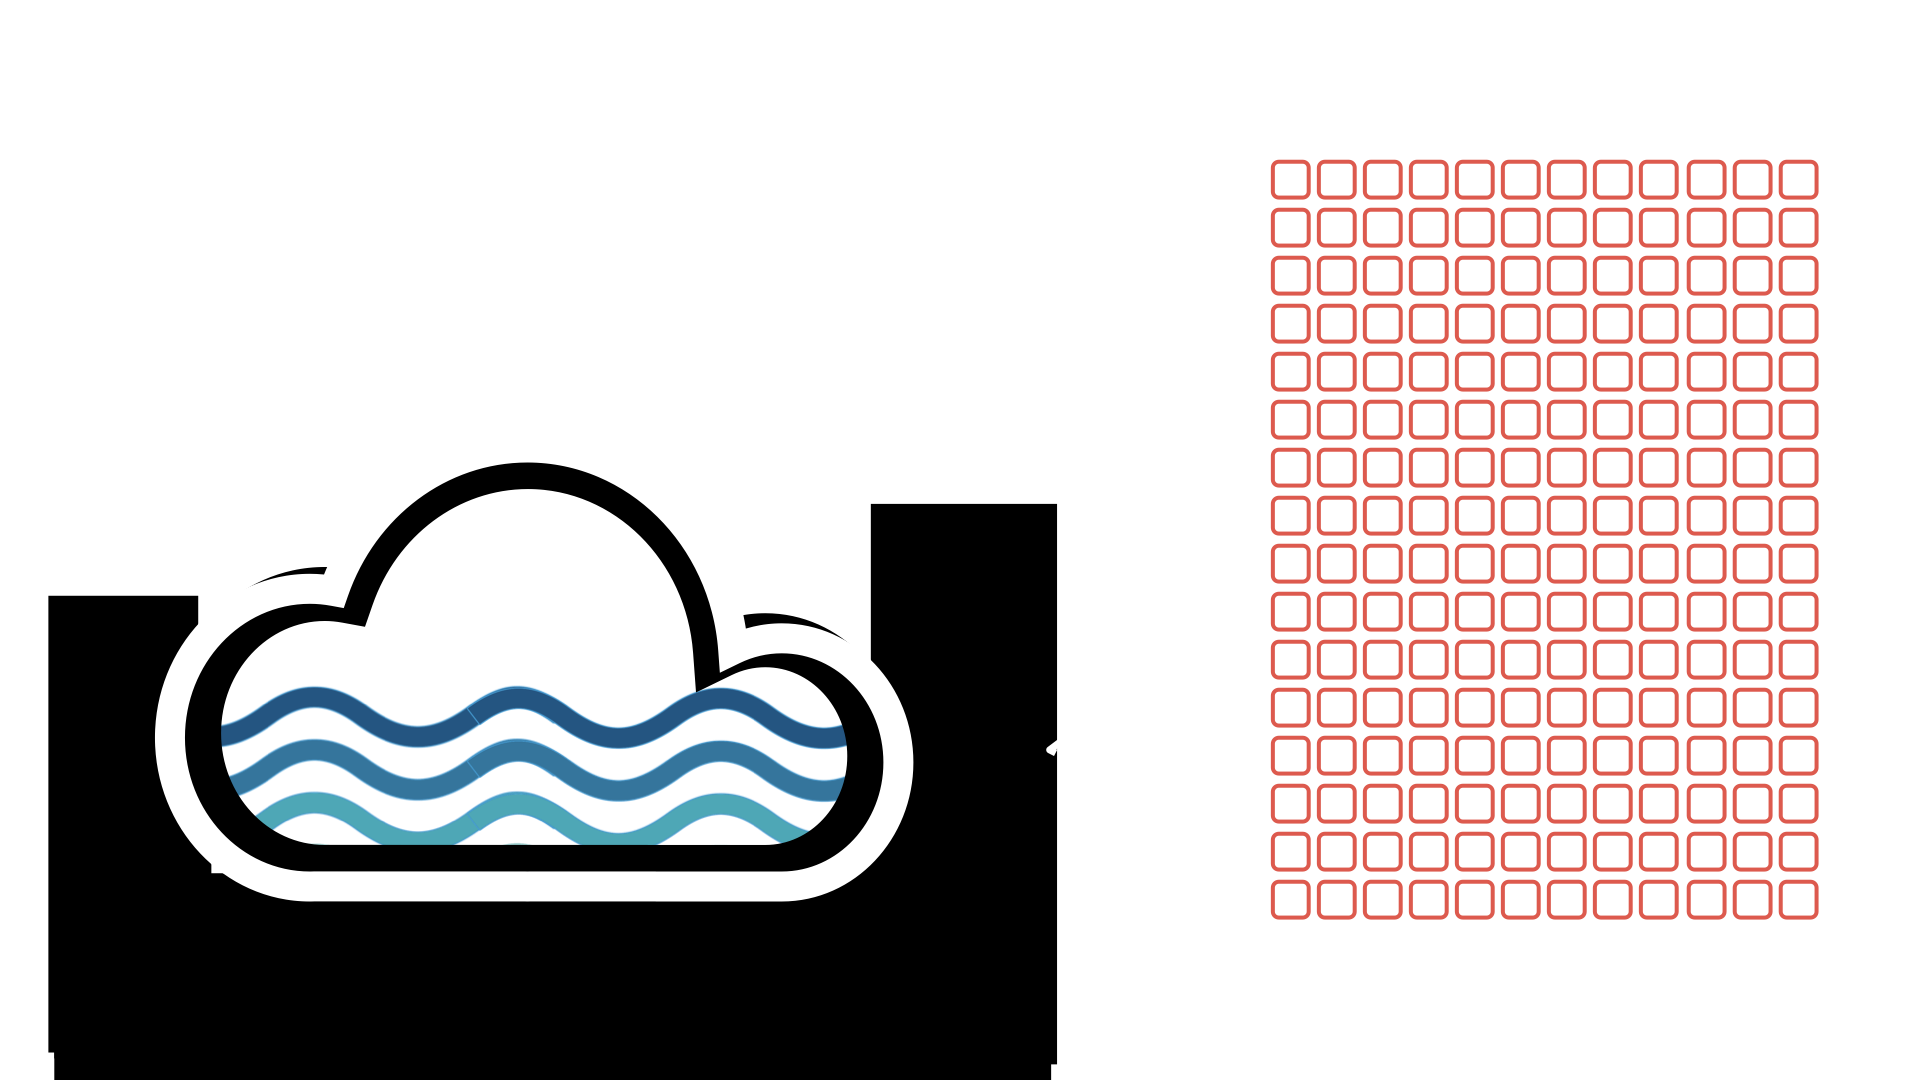 Data Lake with an ocean of small files